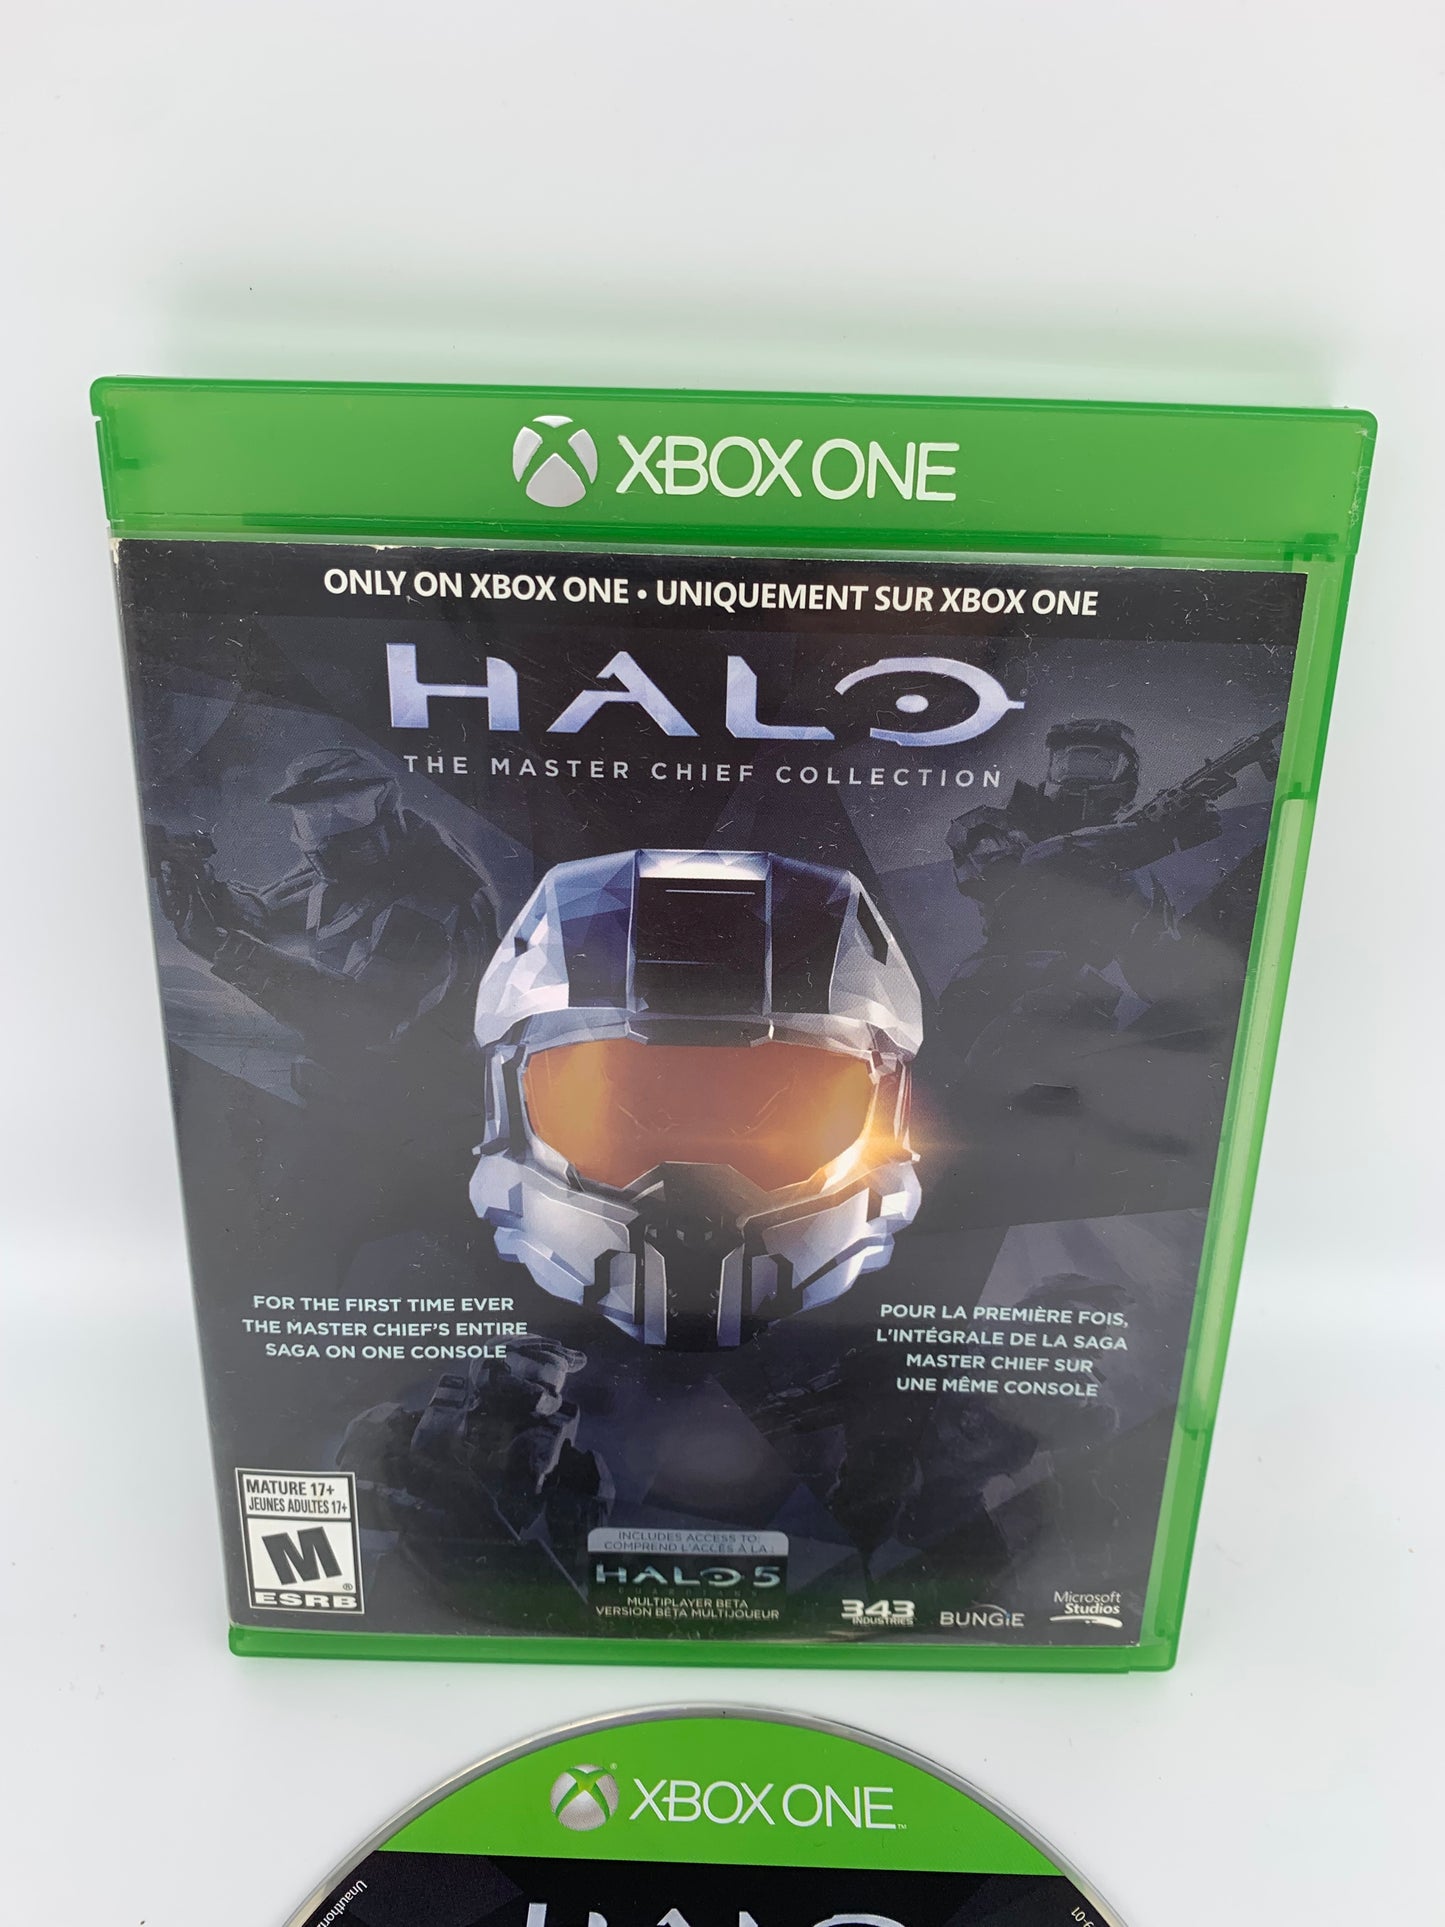 MiCROSOFT XBOX ONE | HALO THE MASTER CHiEF COLLECTiON